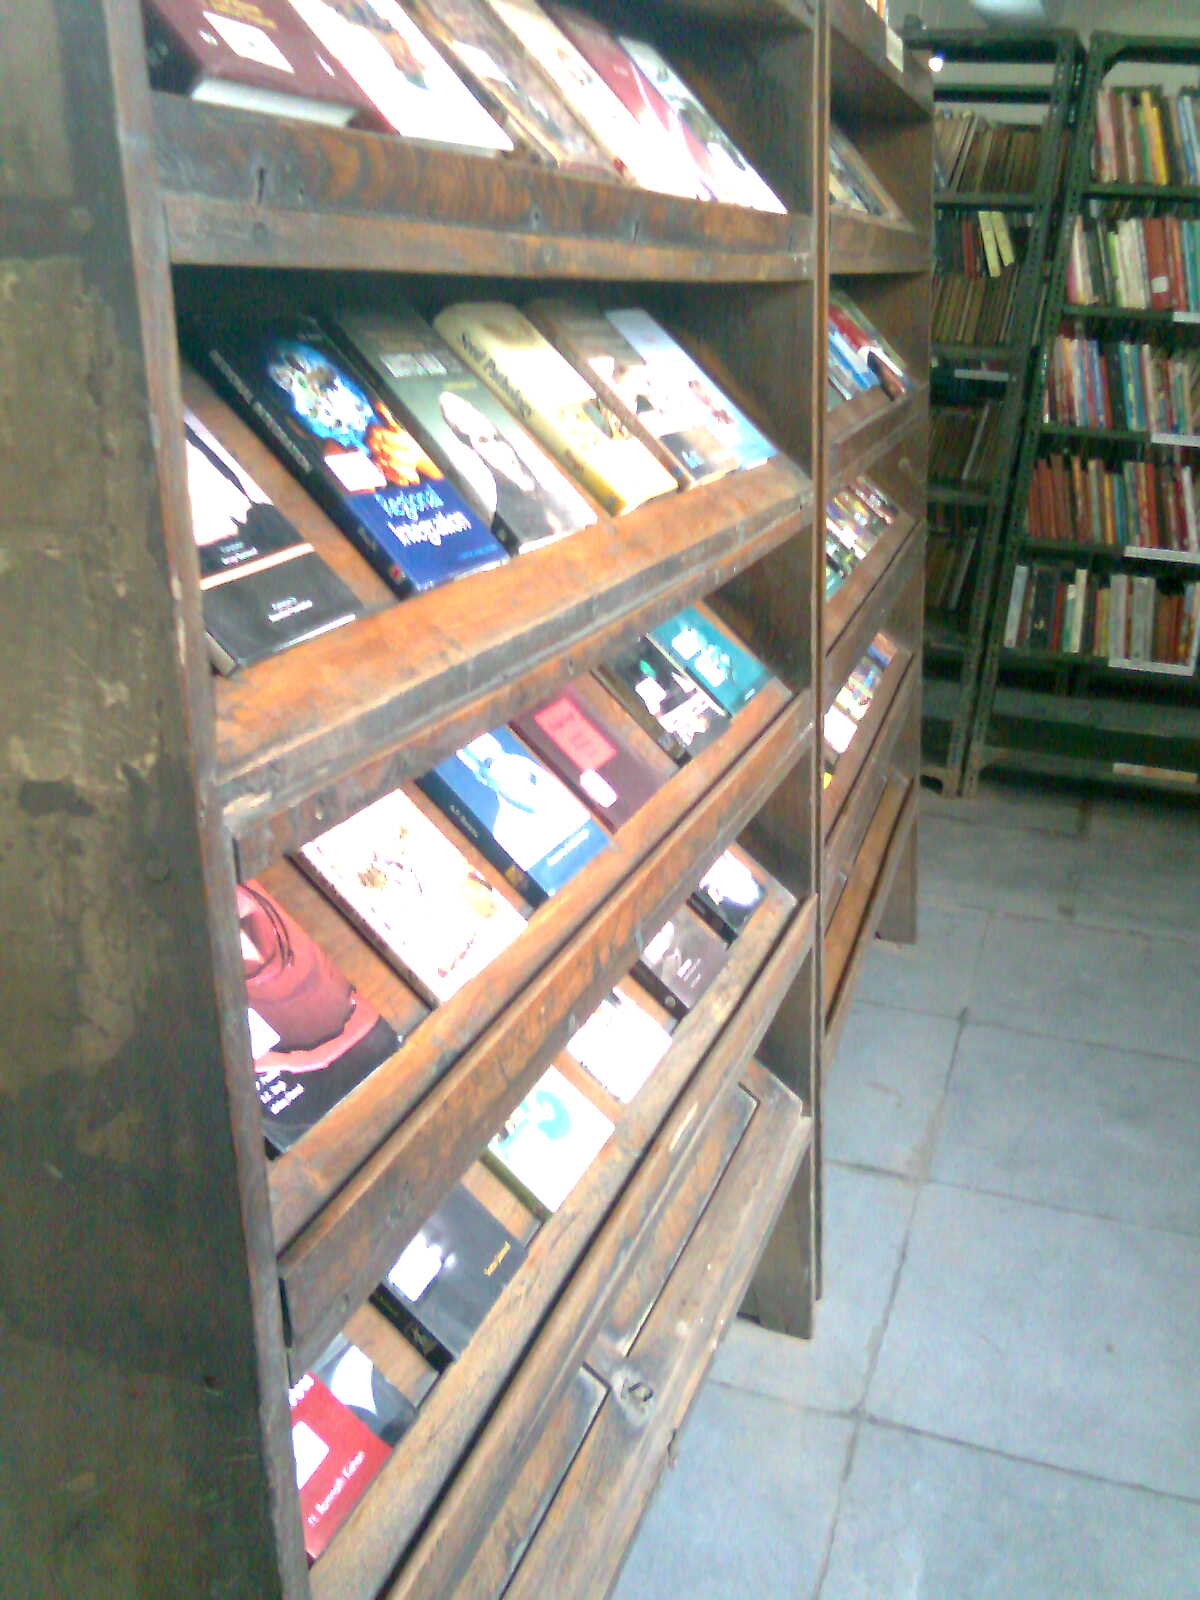 Magazine Section, Central State Library, Ambala Cantt.